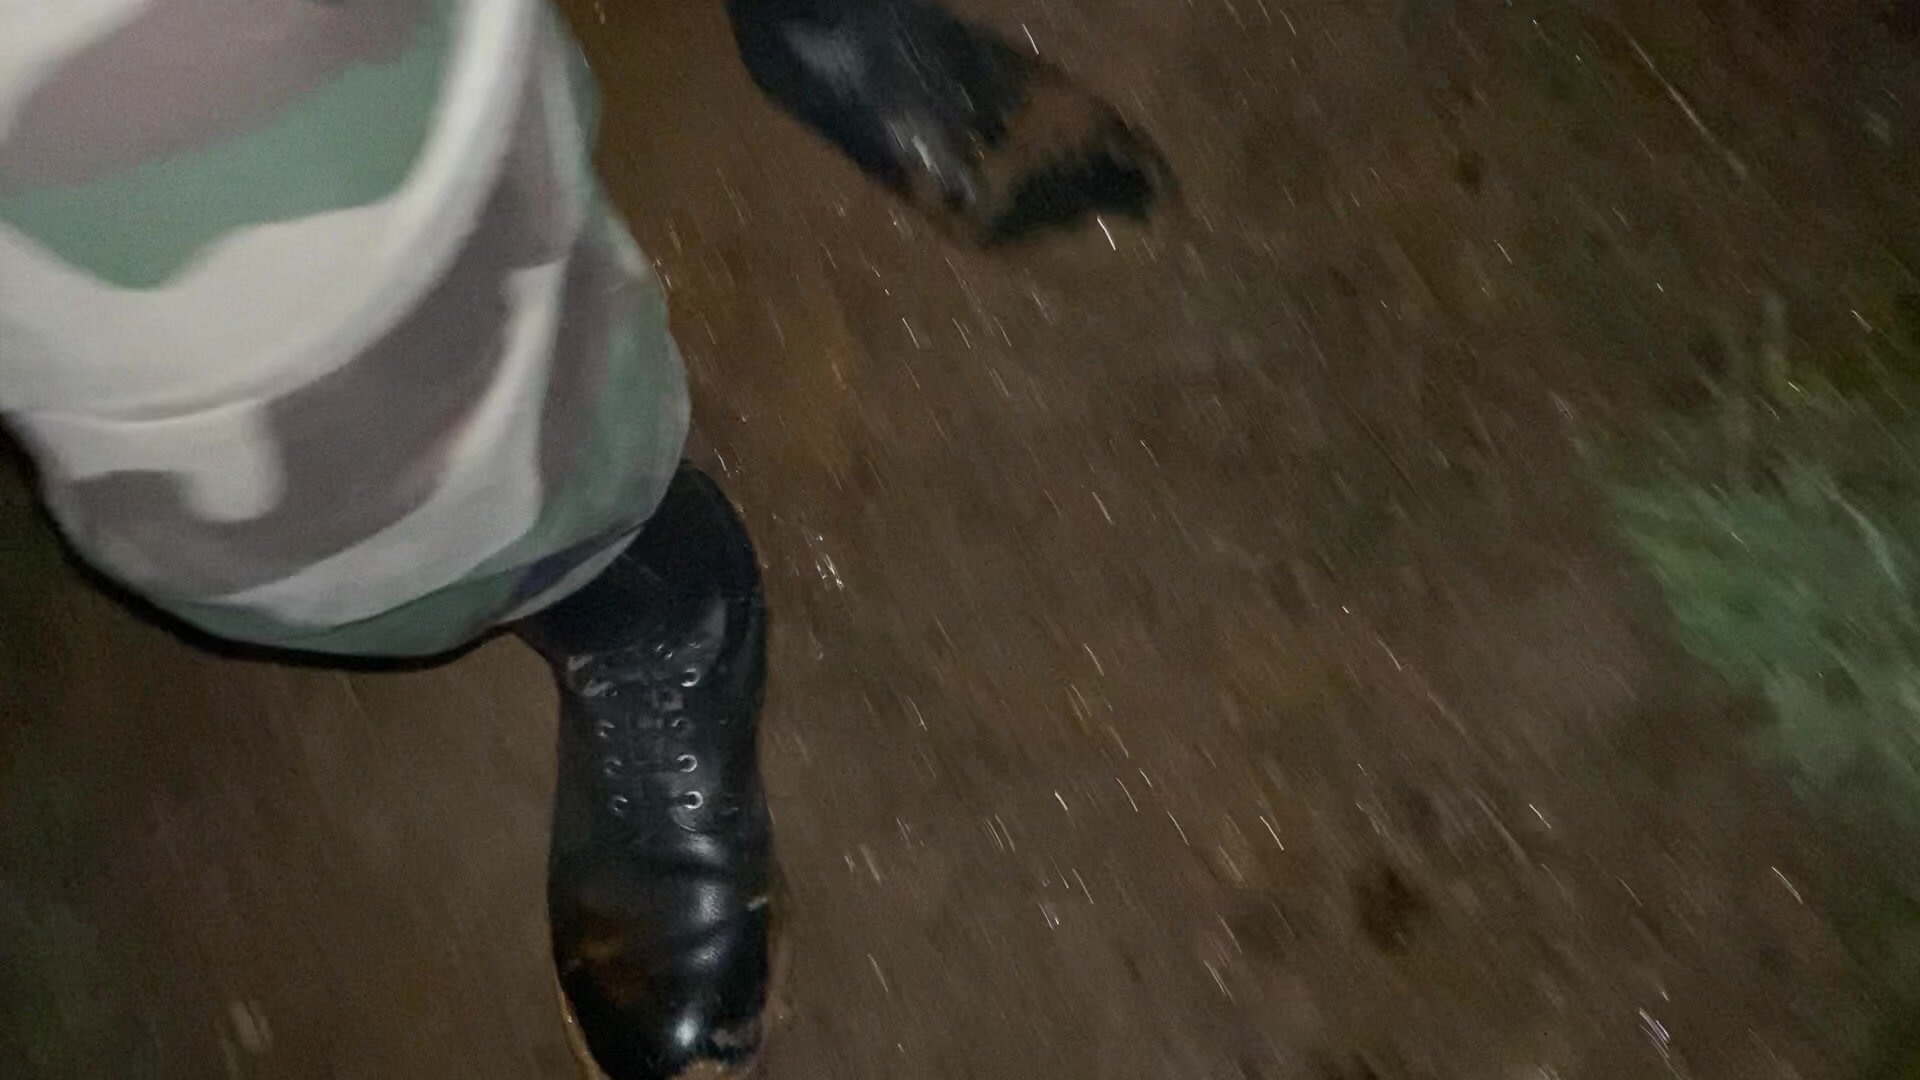 ARMY BOOTS WALK IN THE MUD